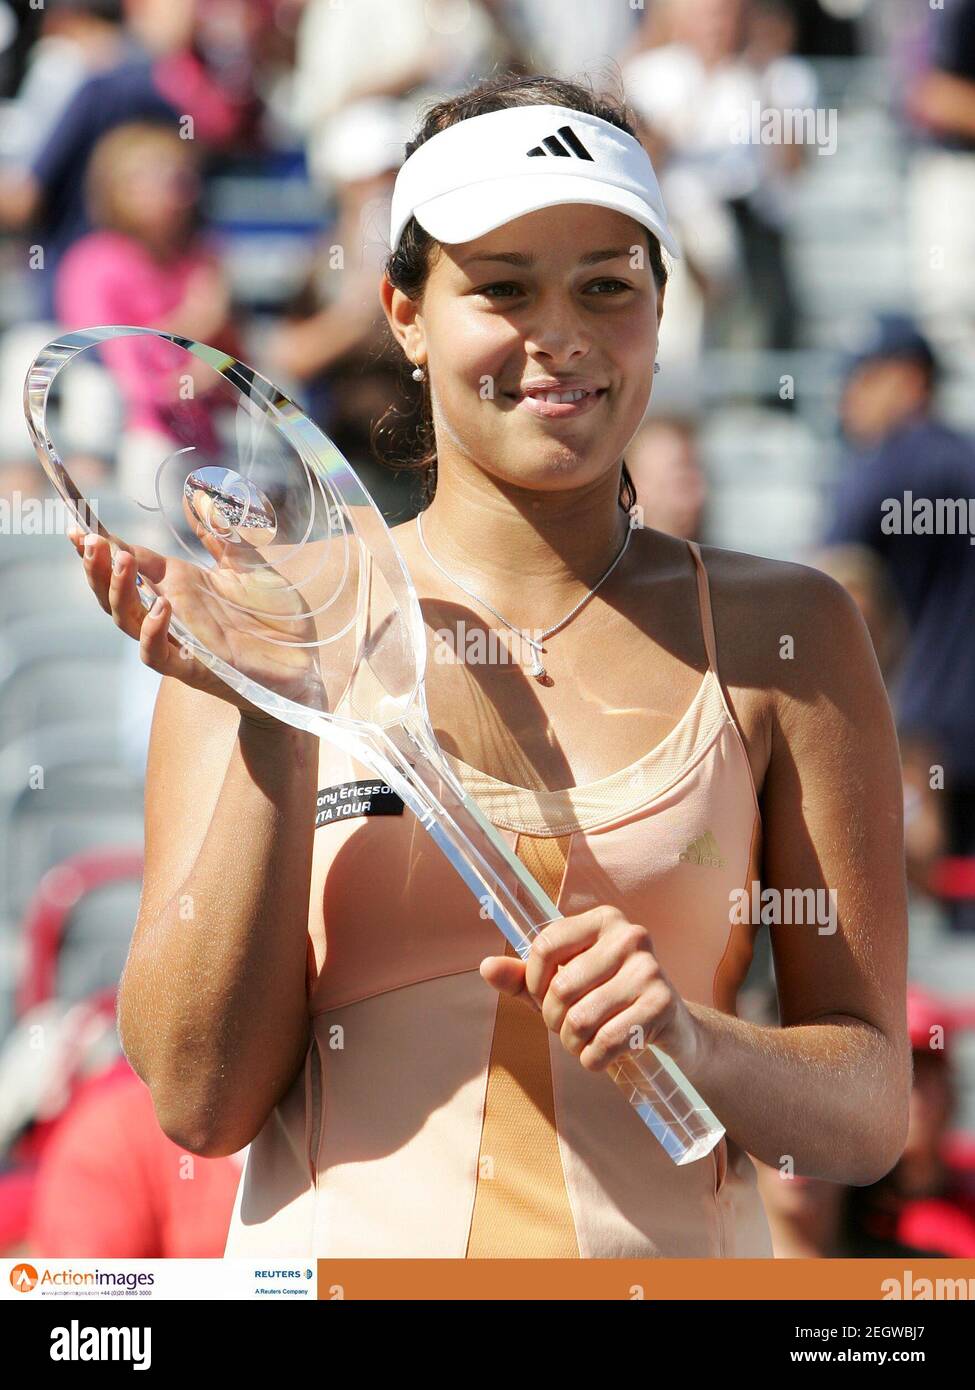 Tennis - Rogers Cup, Sony Ericsson WTA Tour - Montreal, Canada - 21/8/06  Ana Ivanovic of Serbia celebrates with her trophy after defeating Martina Hingis of Switzerland in the finals at the Rogers Cup, Sony Ericsson WTA Tour  Mandatory Credit: Action Images / Chris Wattie  Livepic Stock Photo